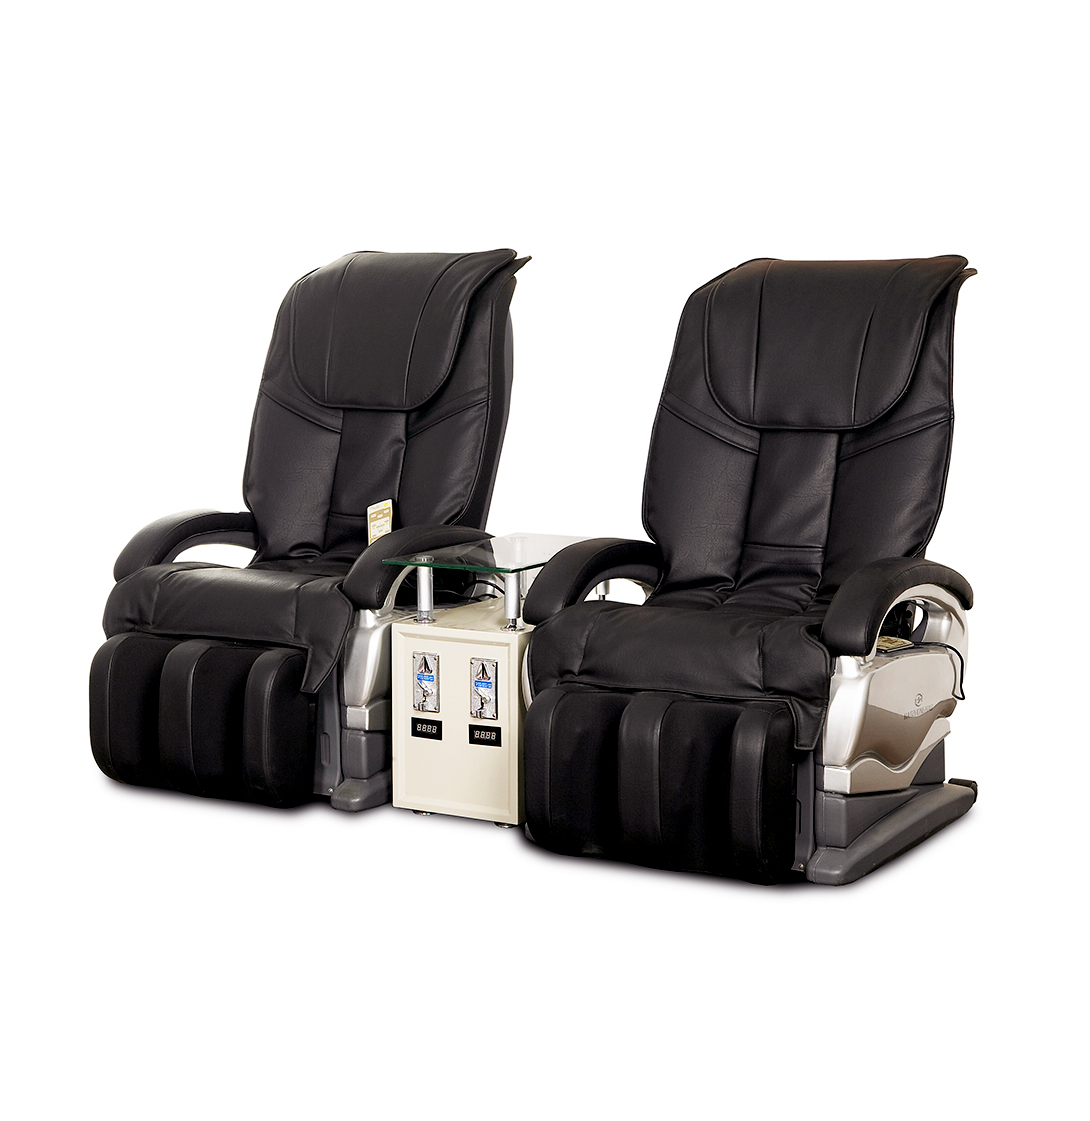 Refurbished Health Pro 3000 Vending Massage Chairs Relaxation Station